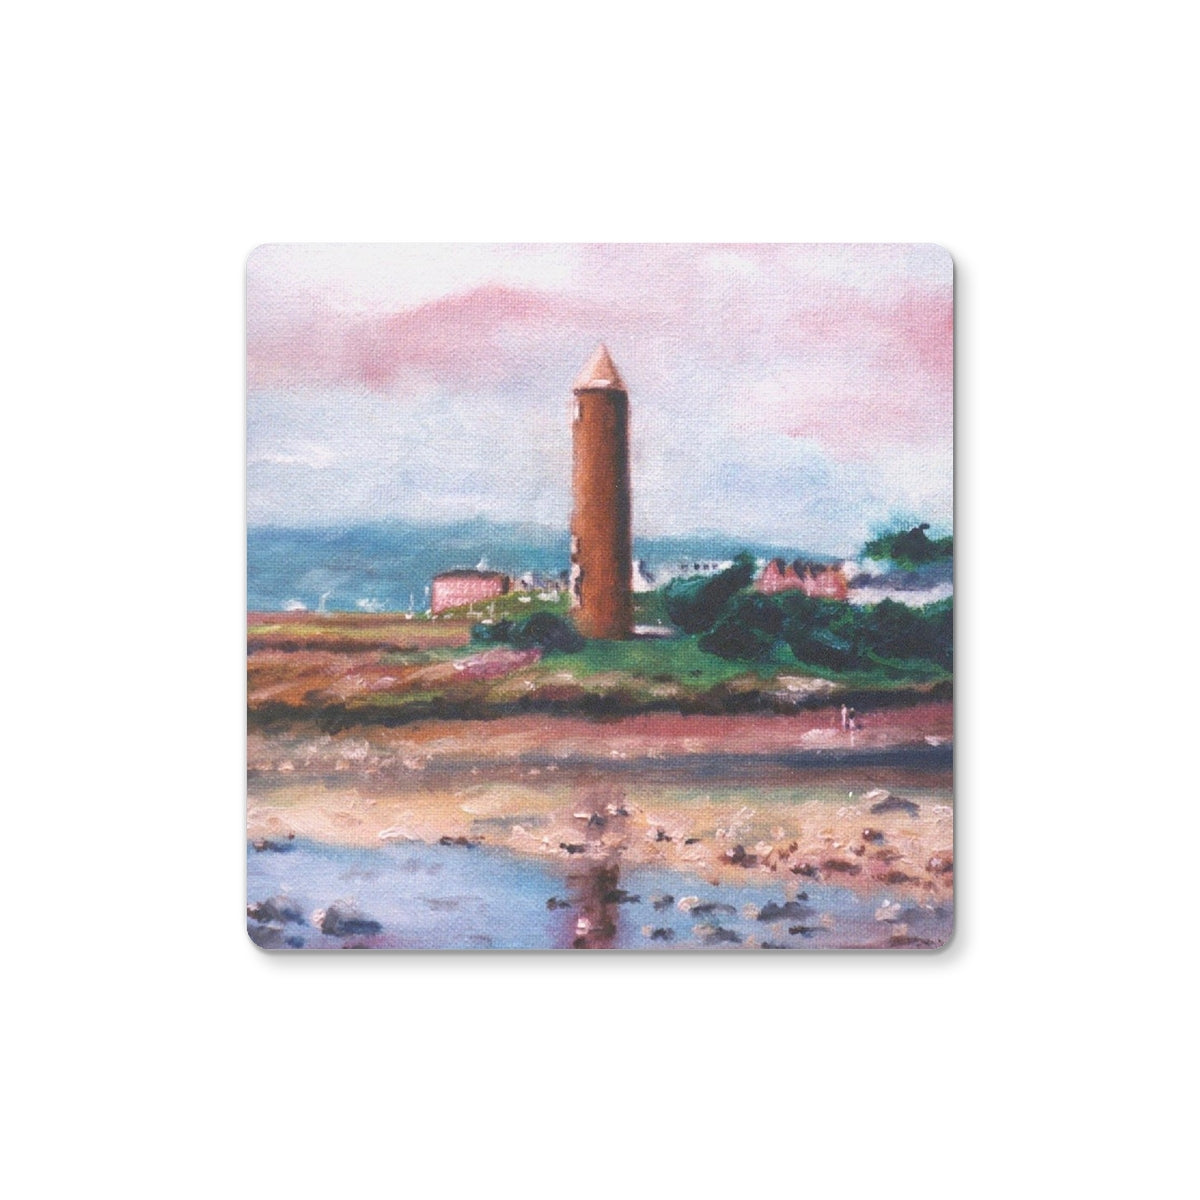 Pencil Point Largs Art Gifts Coaster-Homeware-River Clyde Art Gallery-Single Coaster-Paintings, Prints, Homeware, Art Gifts From Scotland By Scottish Artist Kevin Hunter